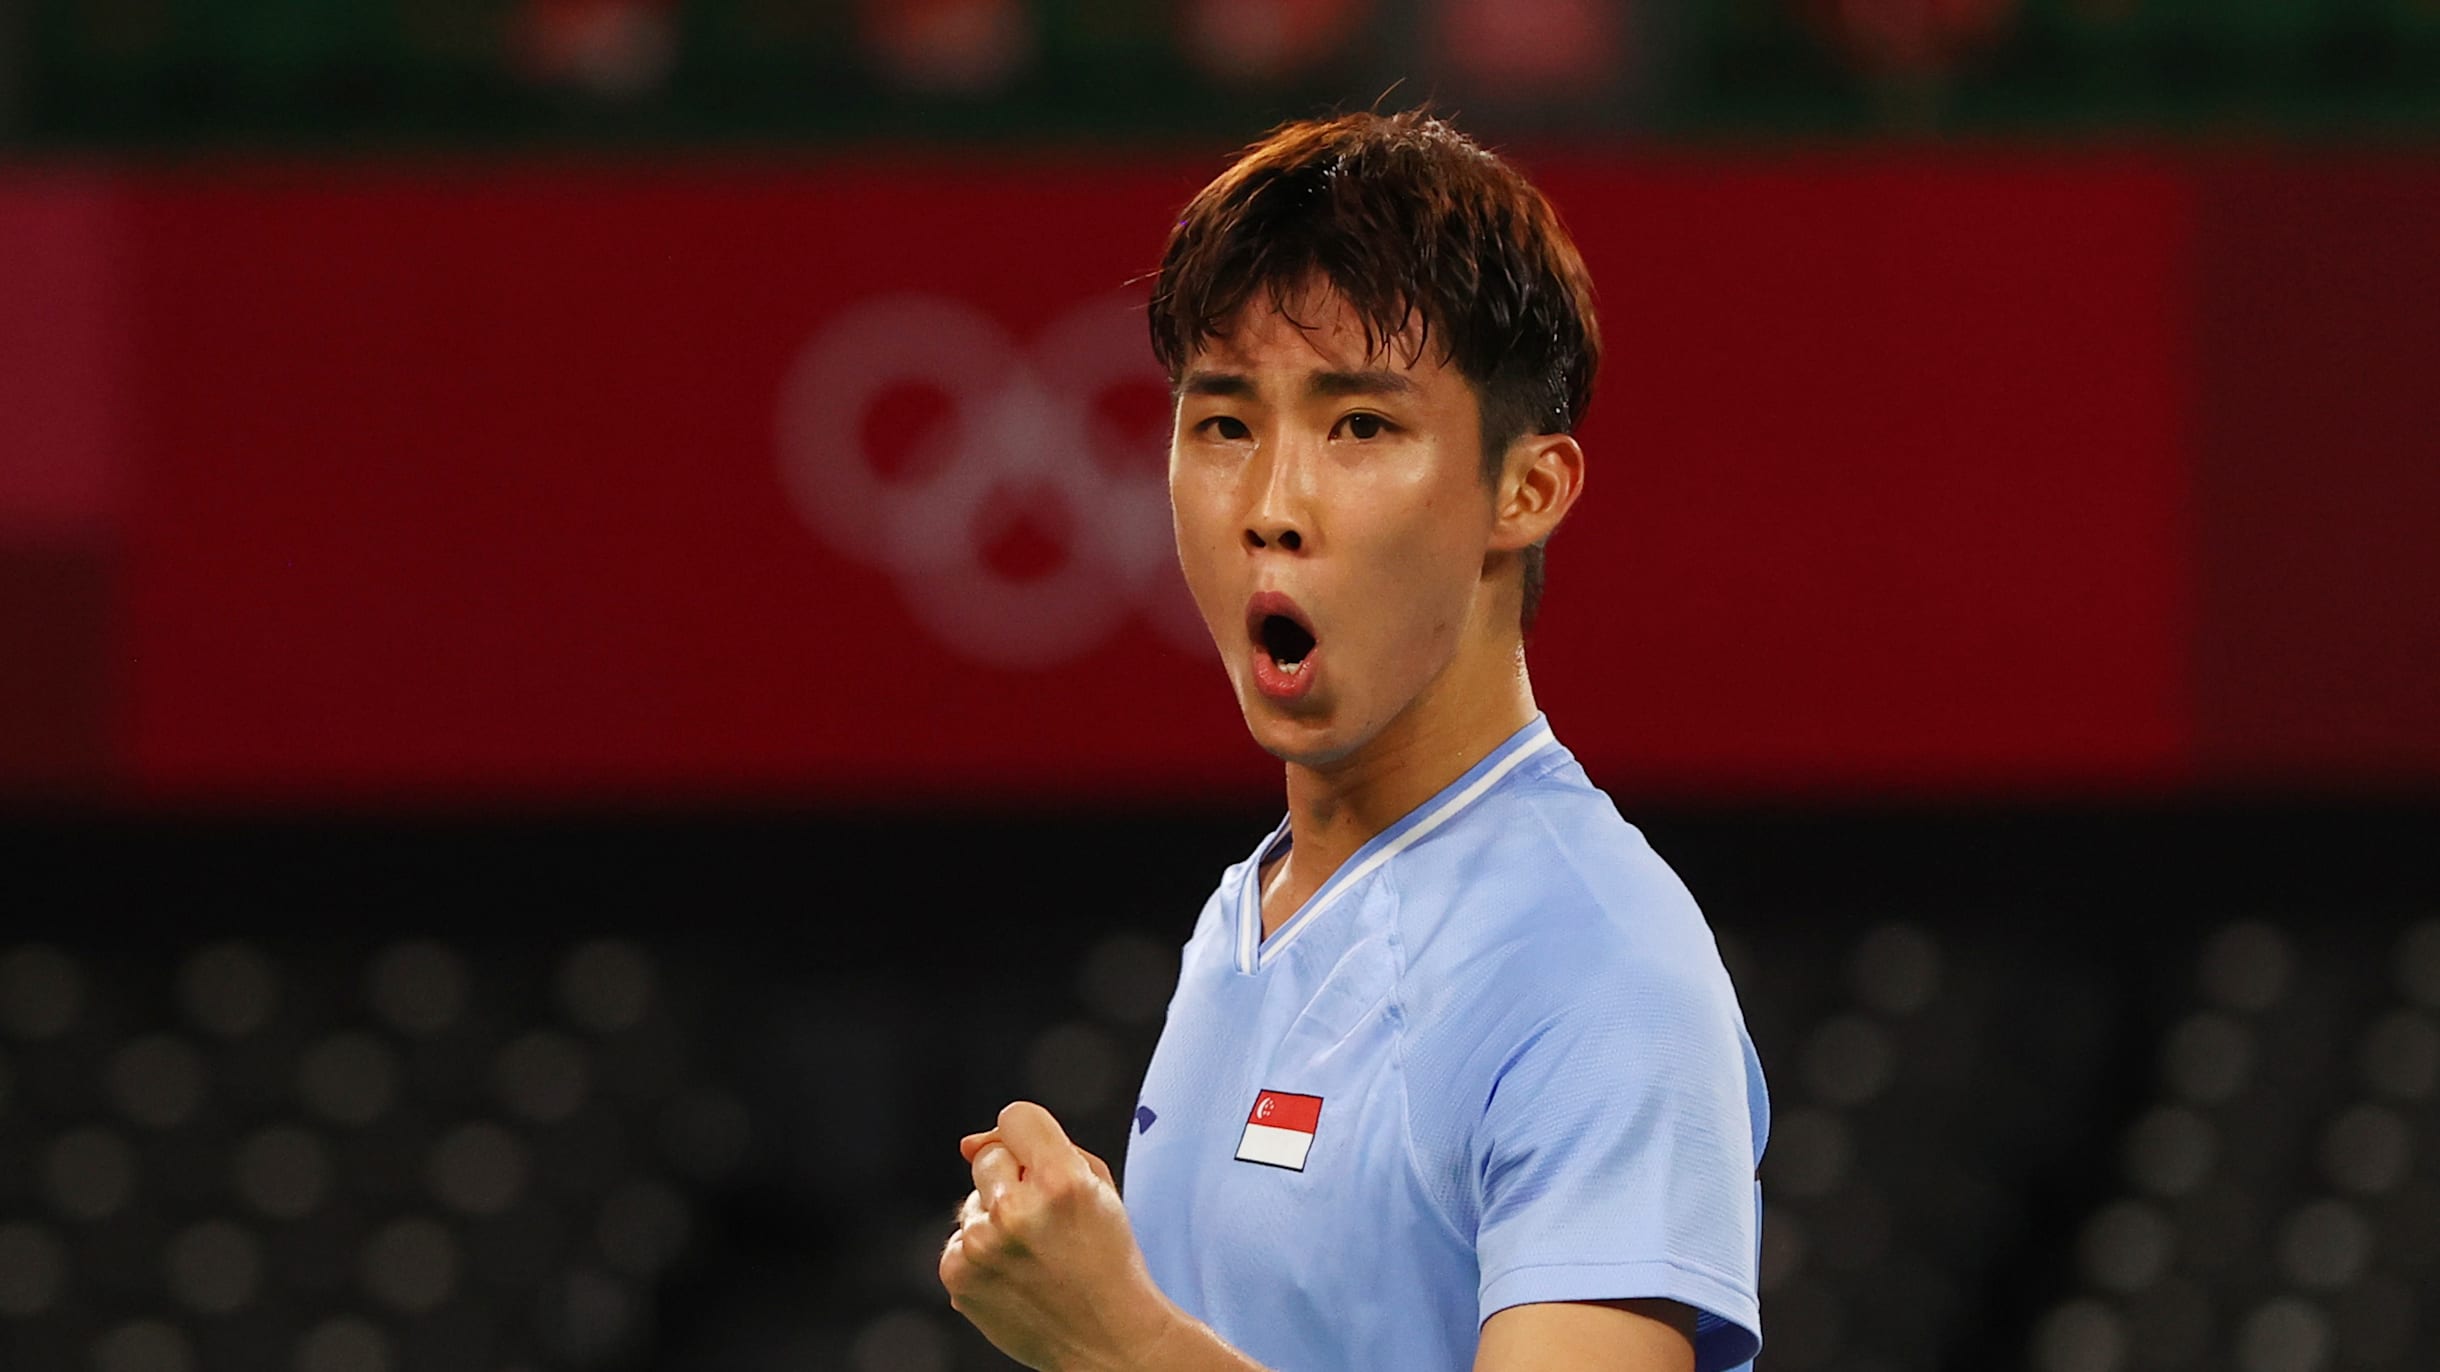 Loh Kean Yew on training with Viktor Axelsen and his aims since becoming world champ